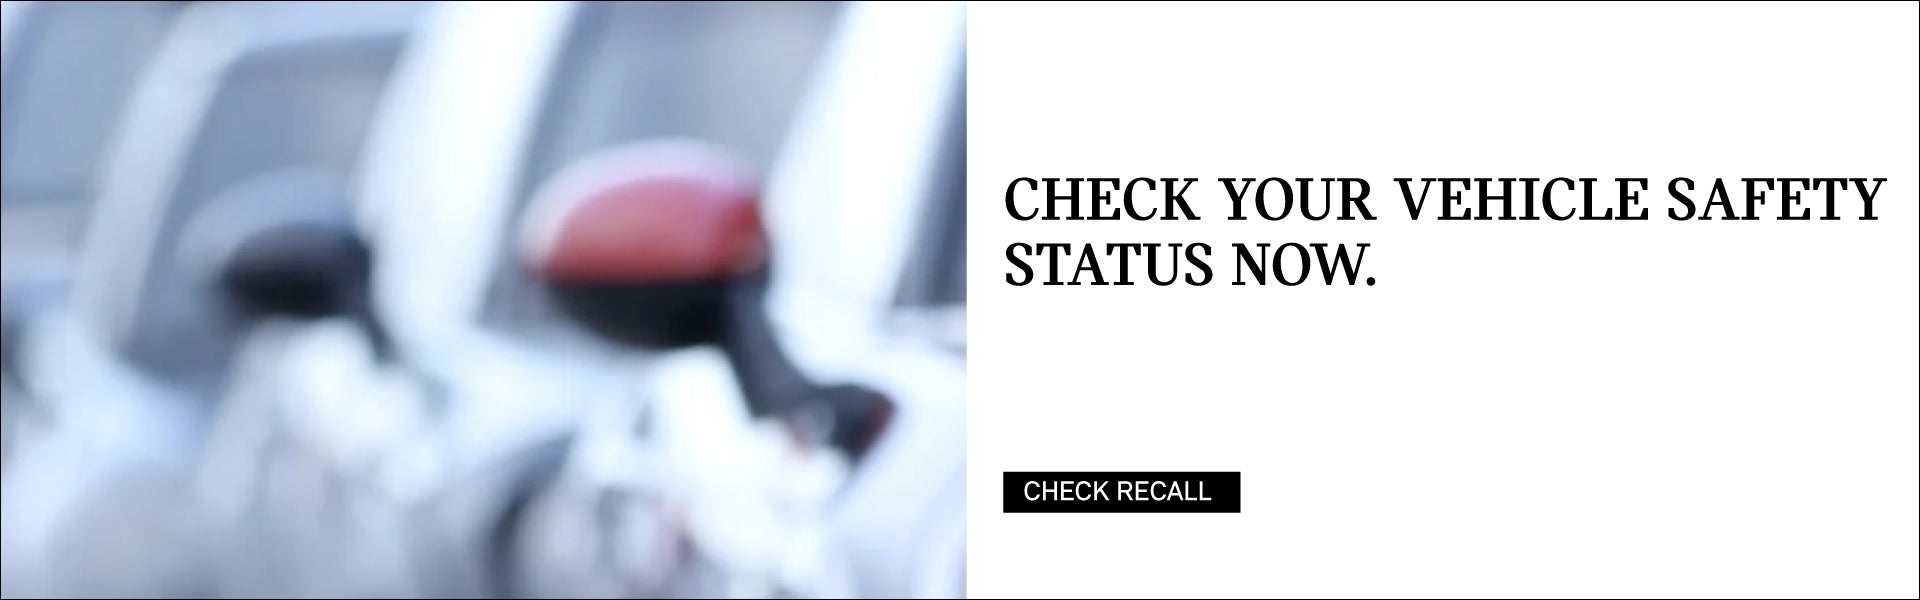 Check Your Vehicle Safety Status Now. Click to check recall.